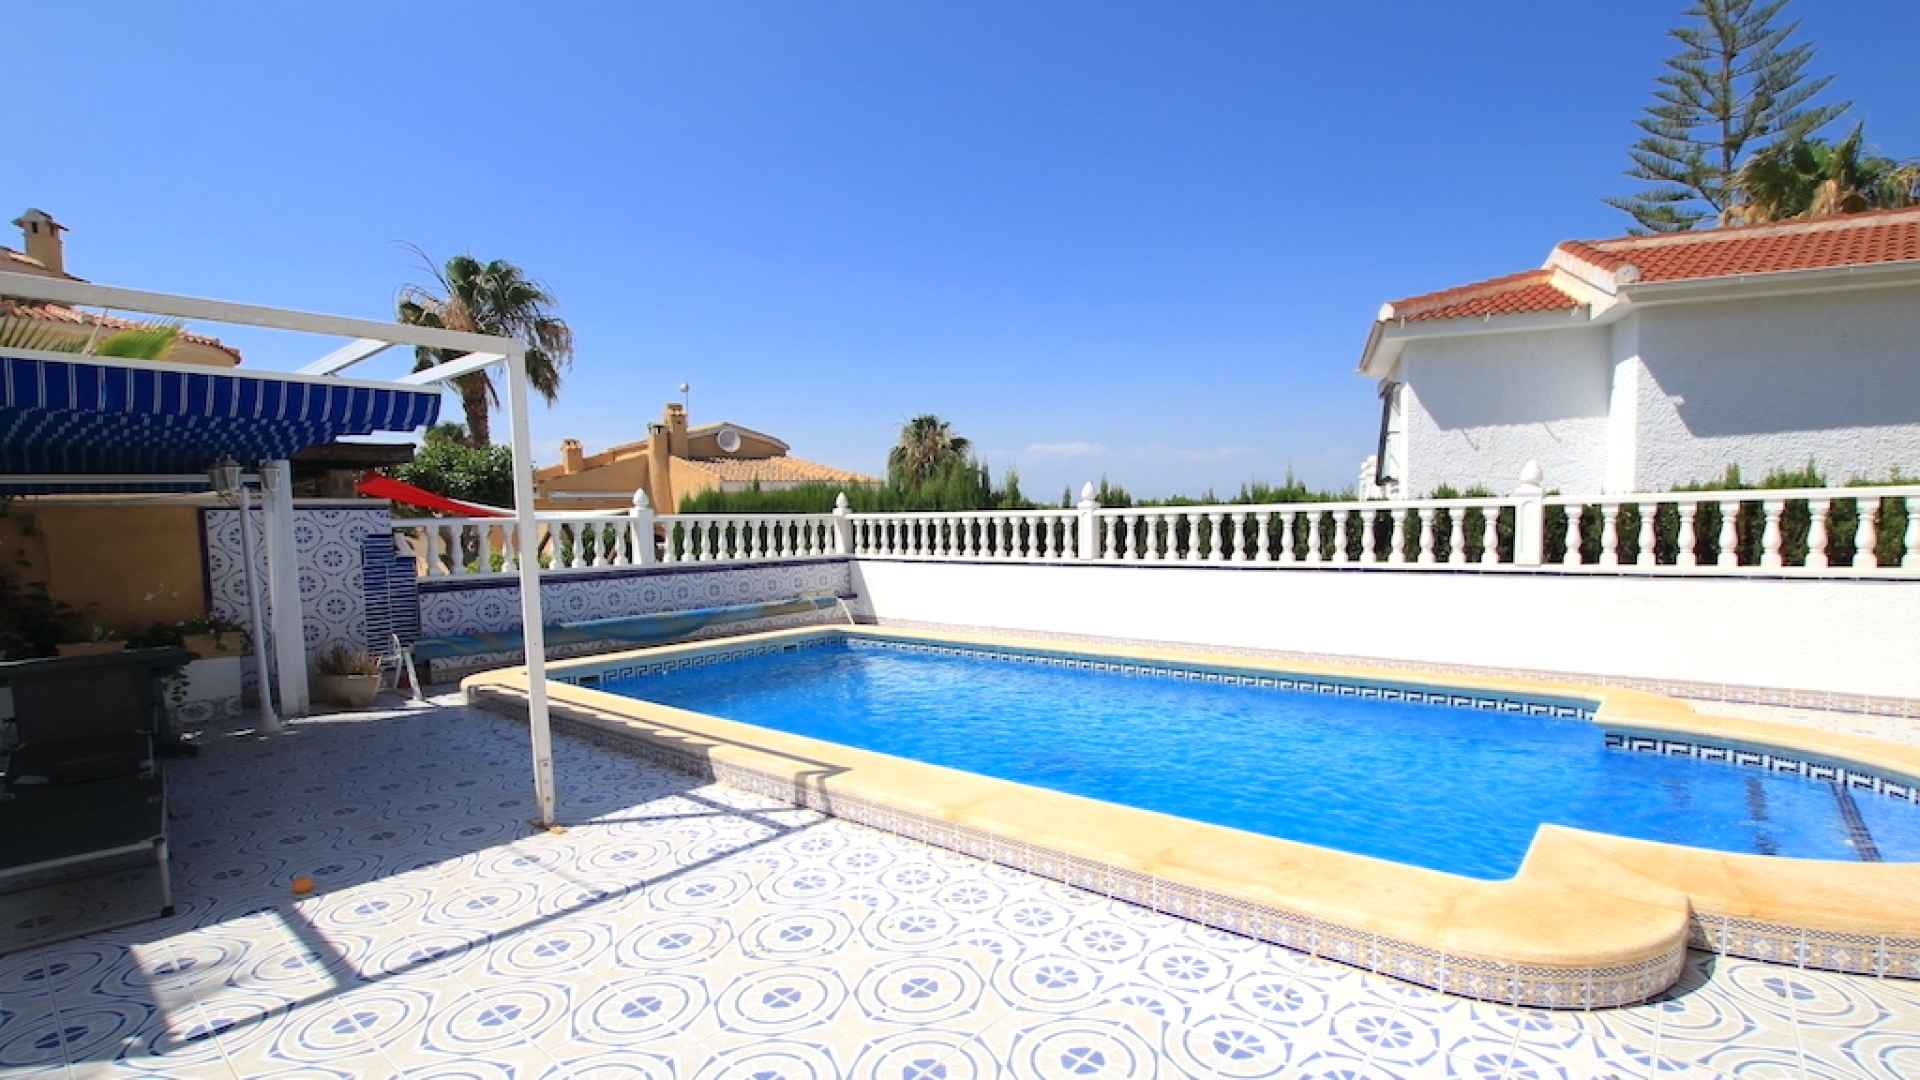 48133_spacious_210sqm_detached_villa_with_internal_garage___private_pool_260623093703_img_5906